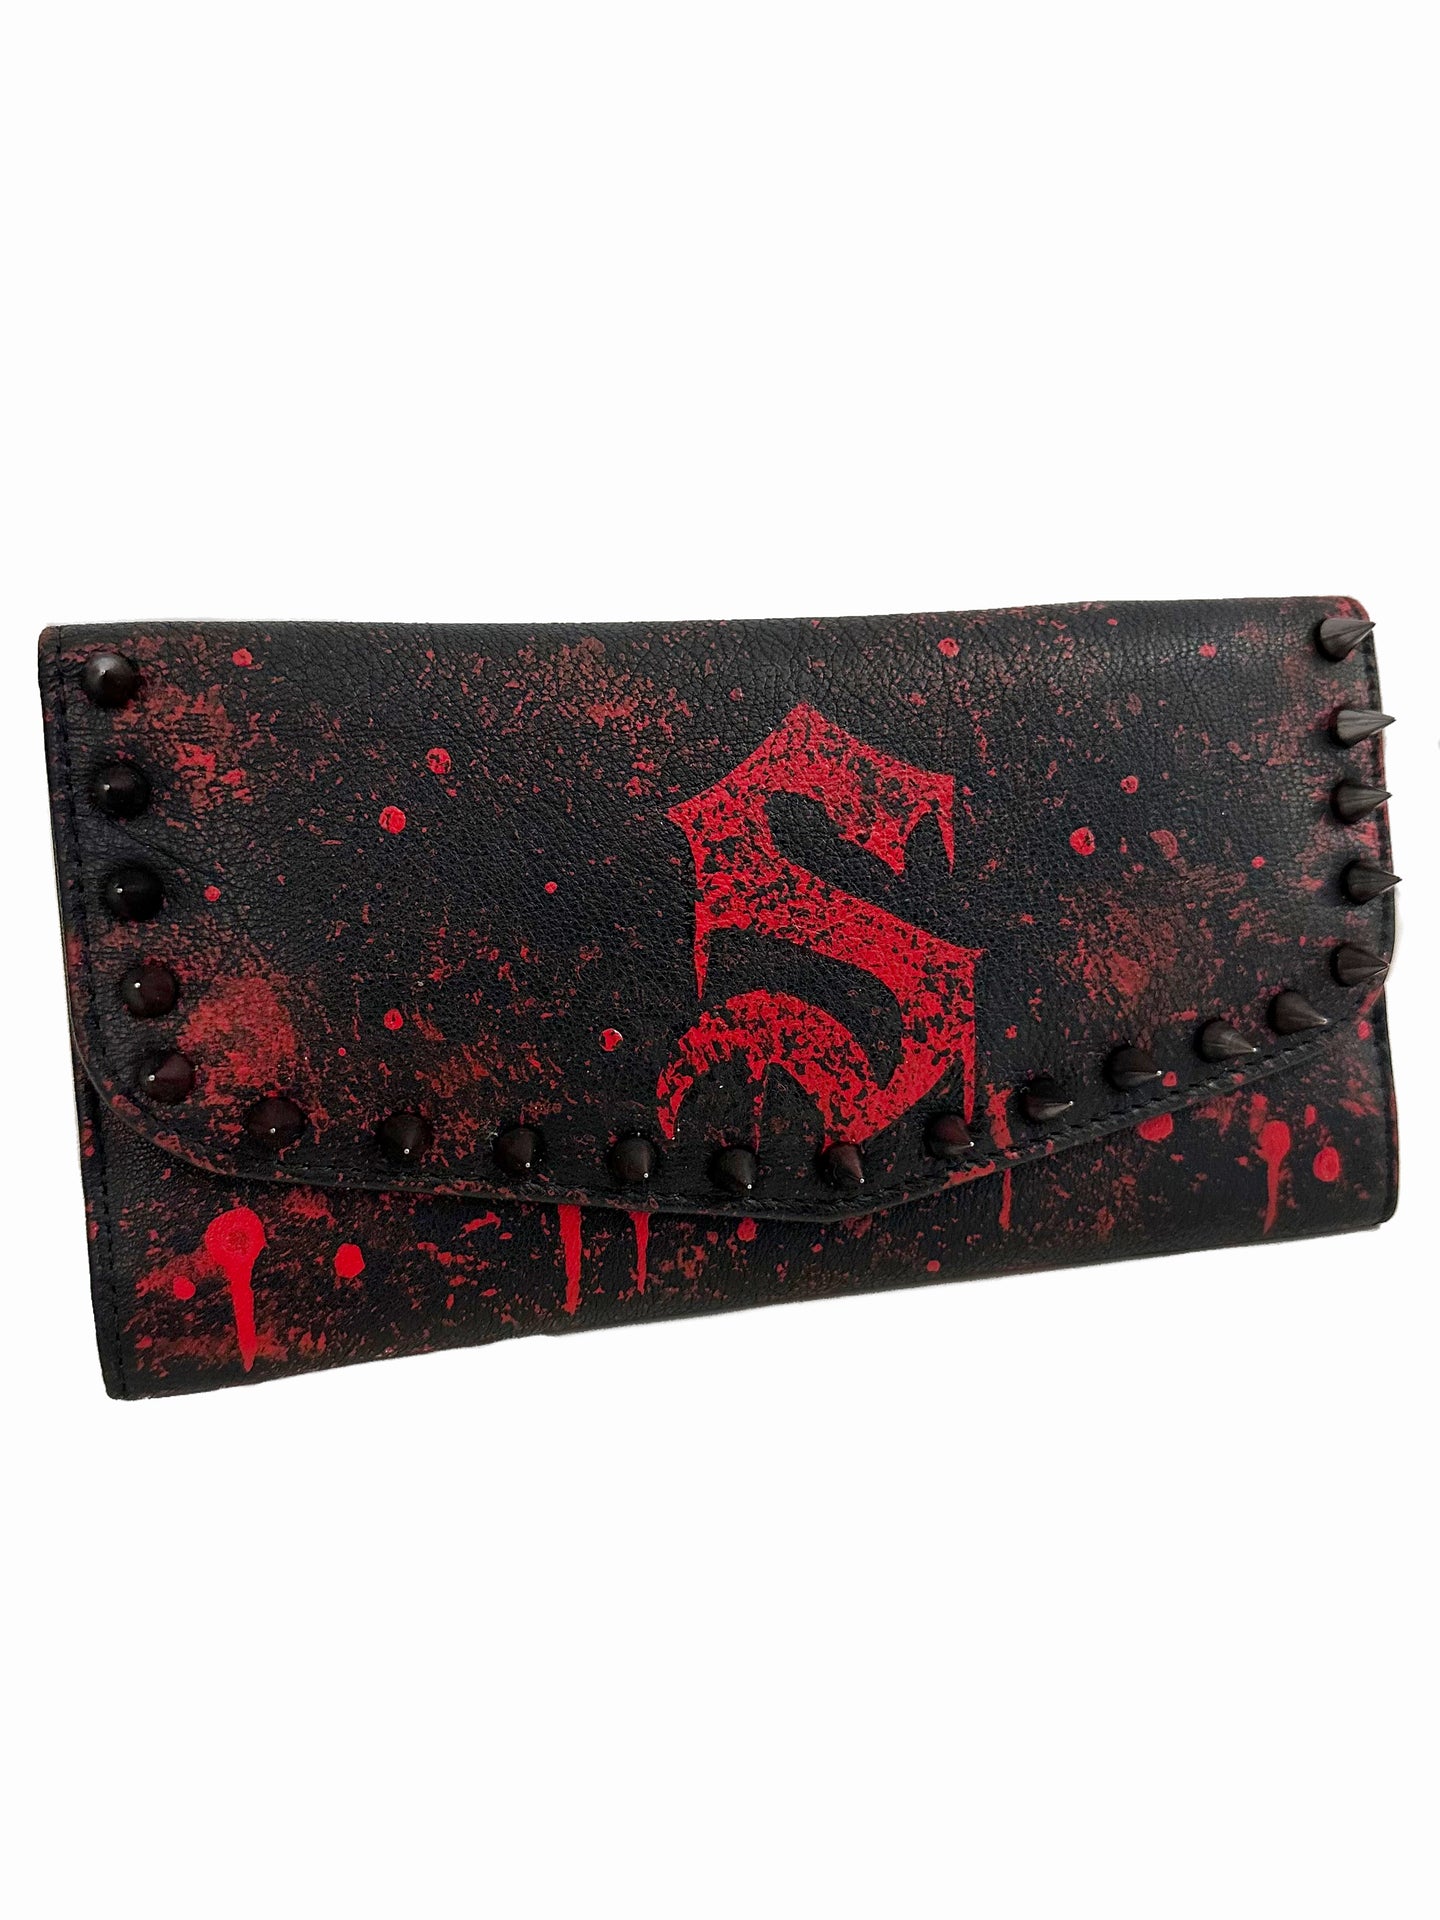 EVIL DEAD SPIKED PURSE